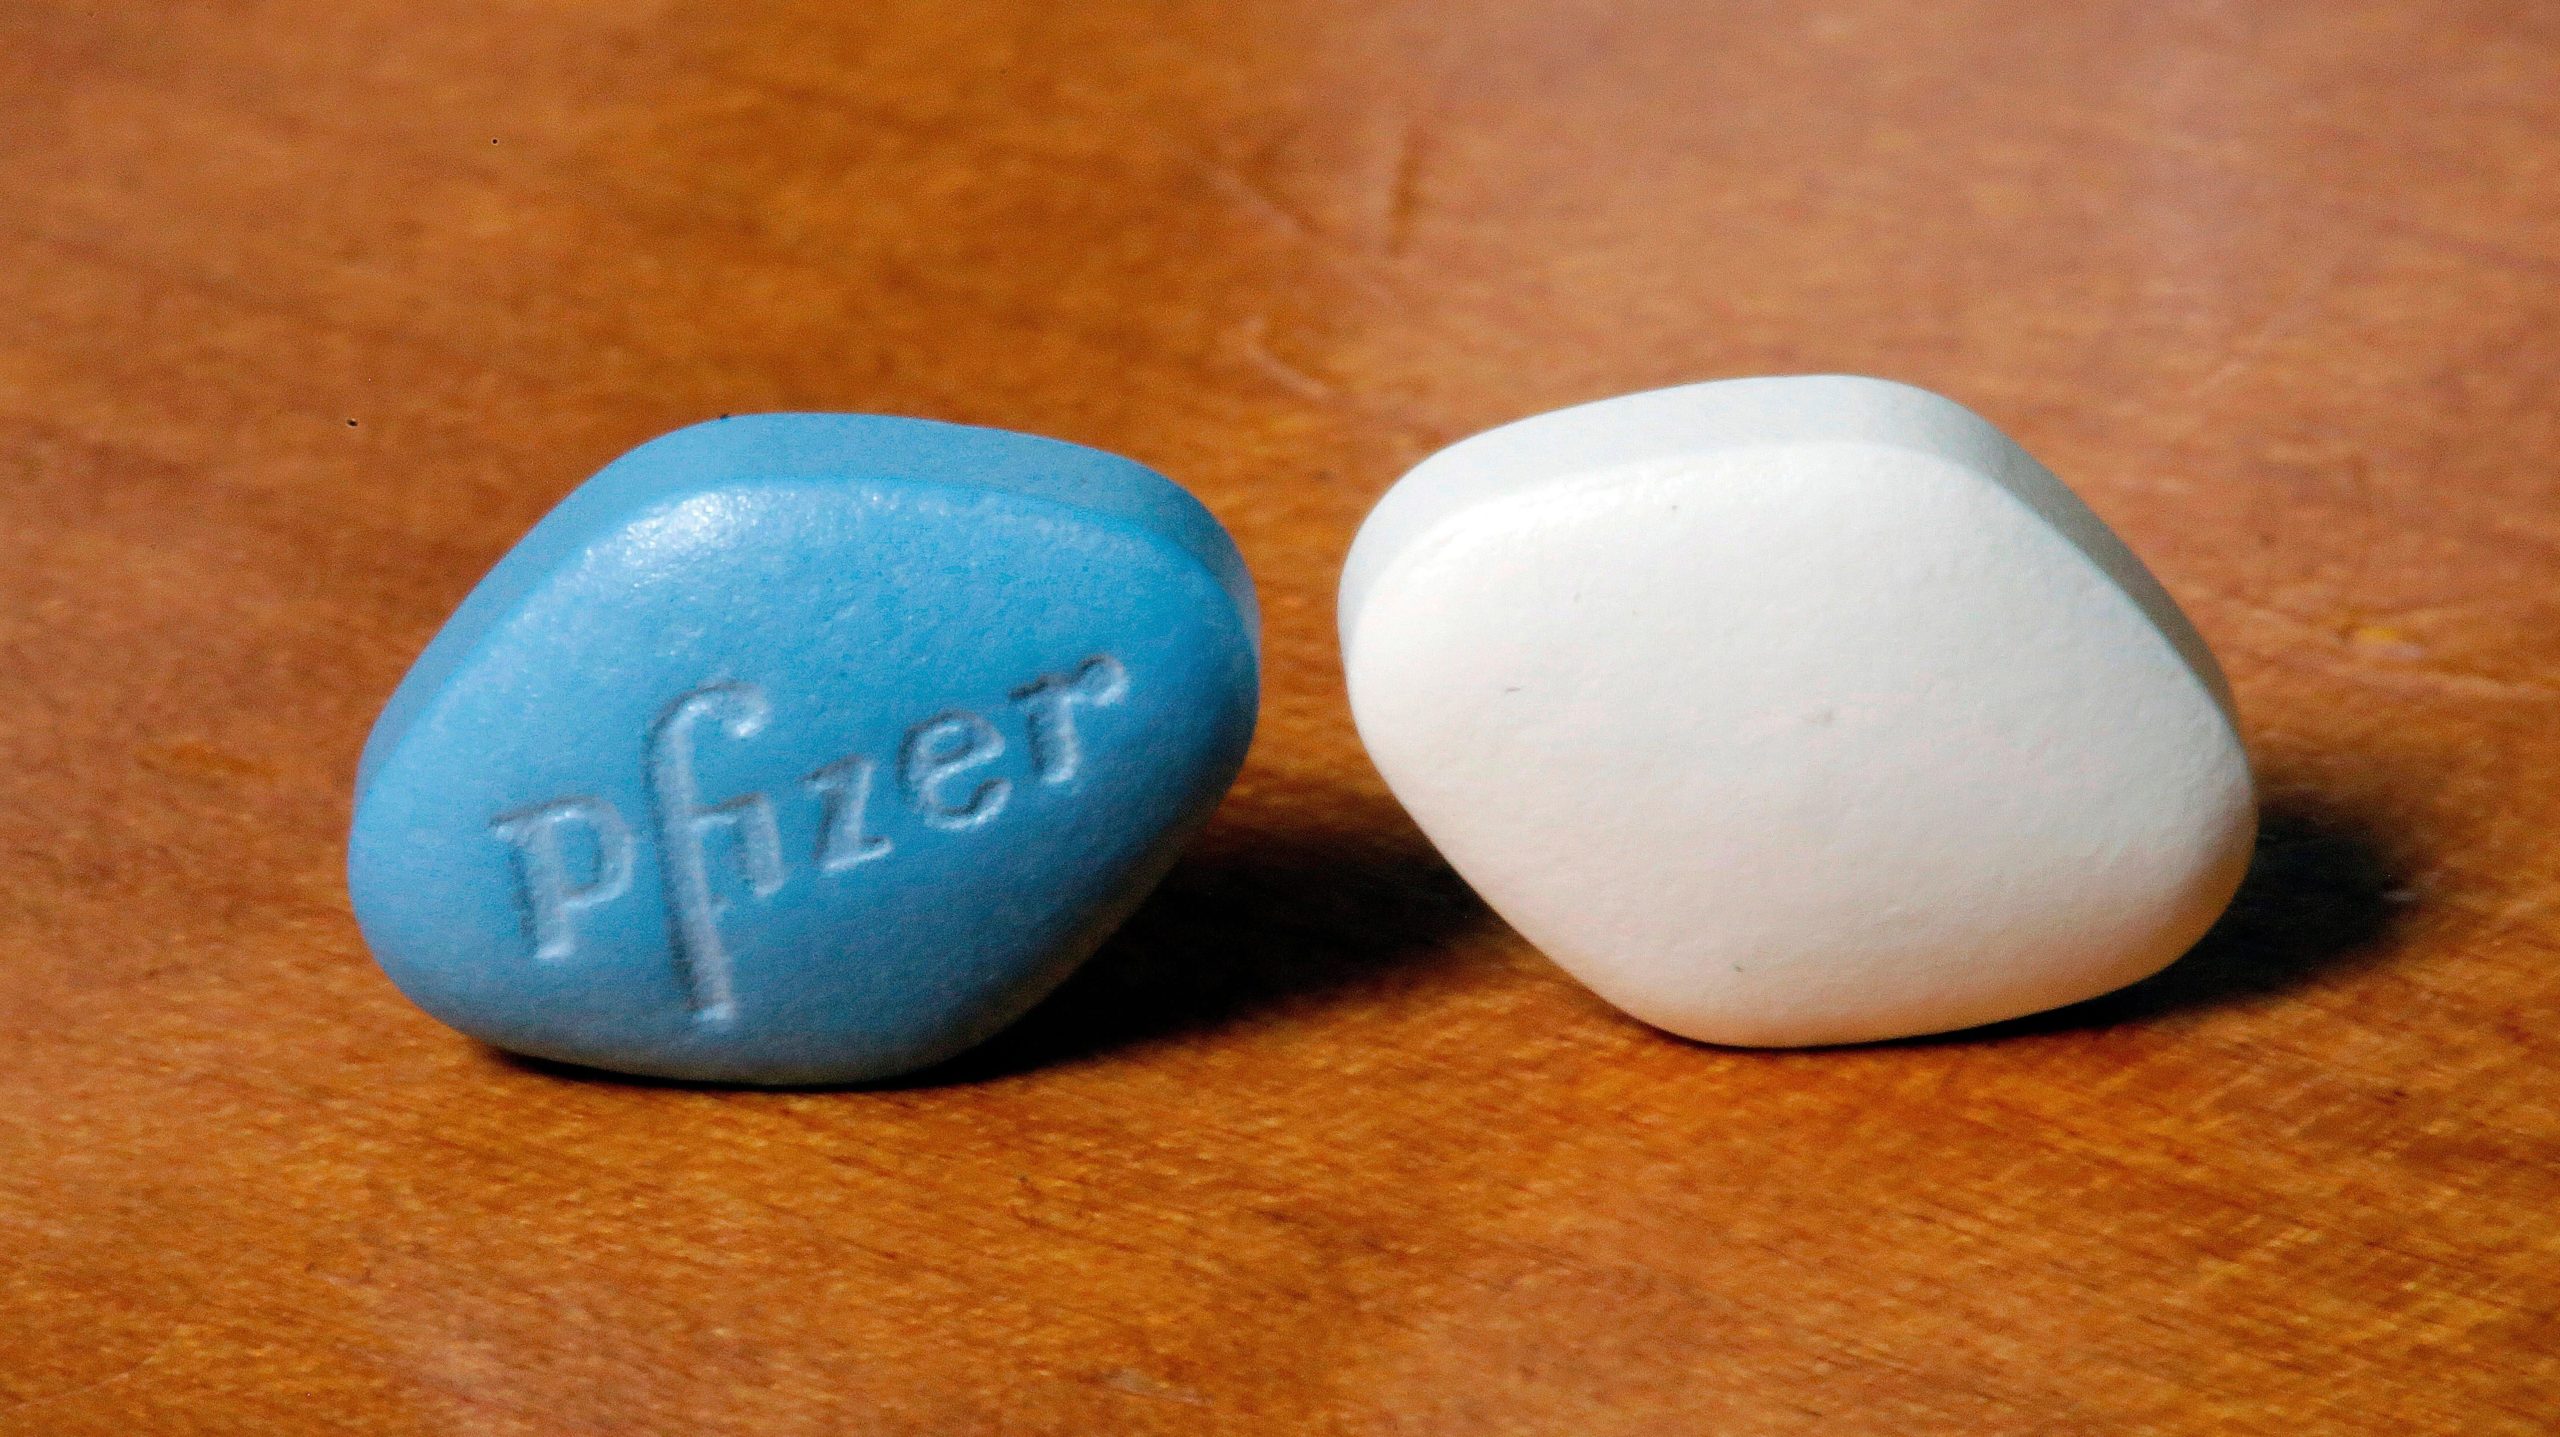 A tablet of Pfizer's Viagra, next to its generic equivalent. Both contain the active ingredient sildenafil (Photo: Richard Drew, Getty Images)